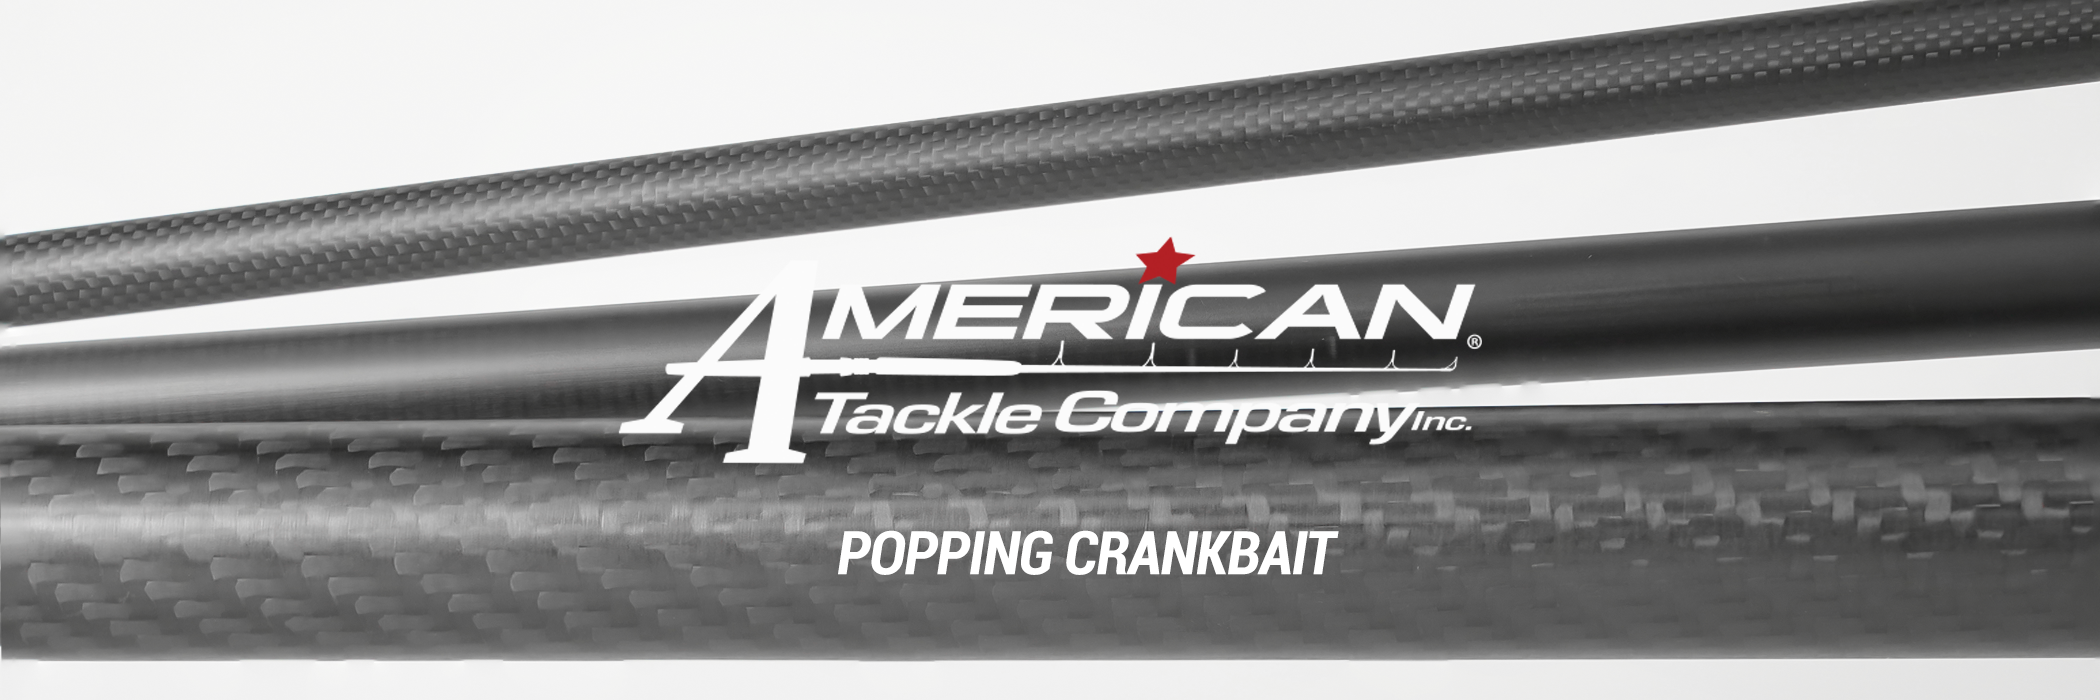 American Tackle - Popping Crankbait